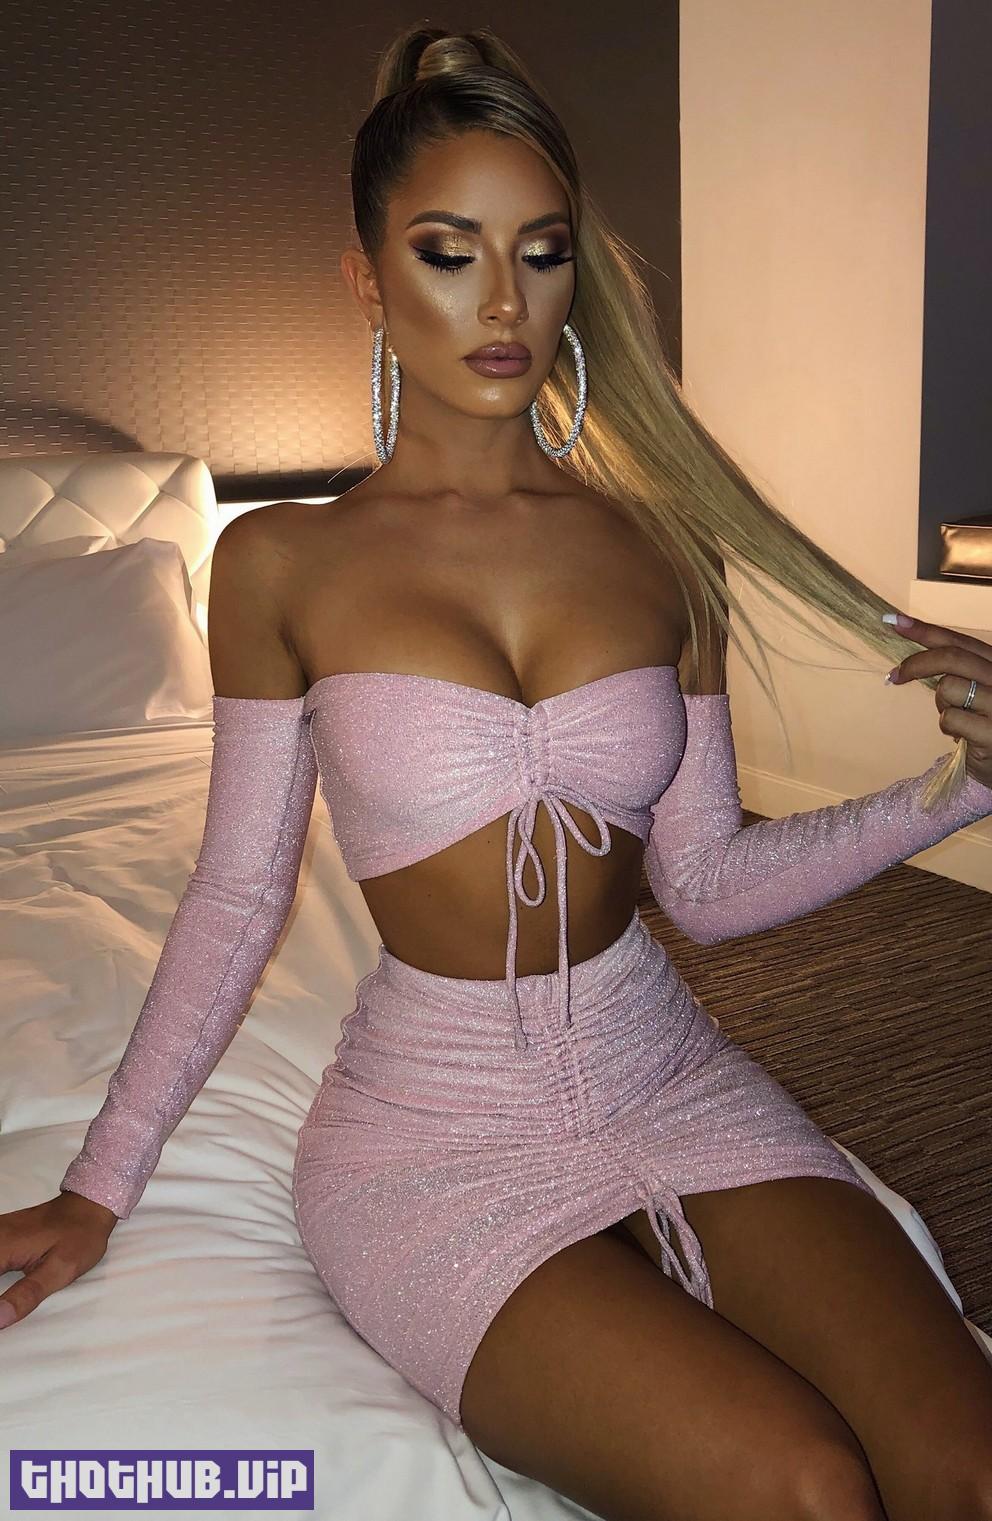 1680425507 705 Sierra Skye TheFappening Sexy 95 Photos and Videos